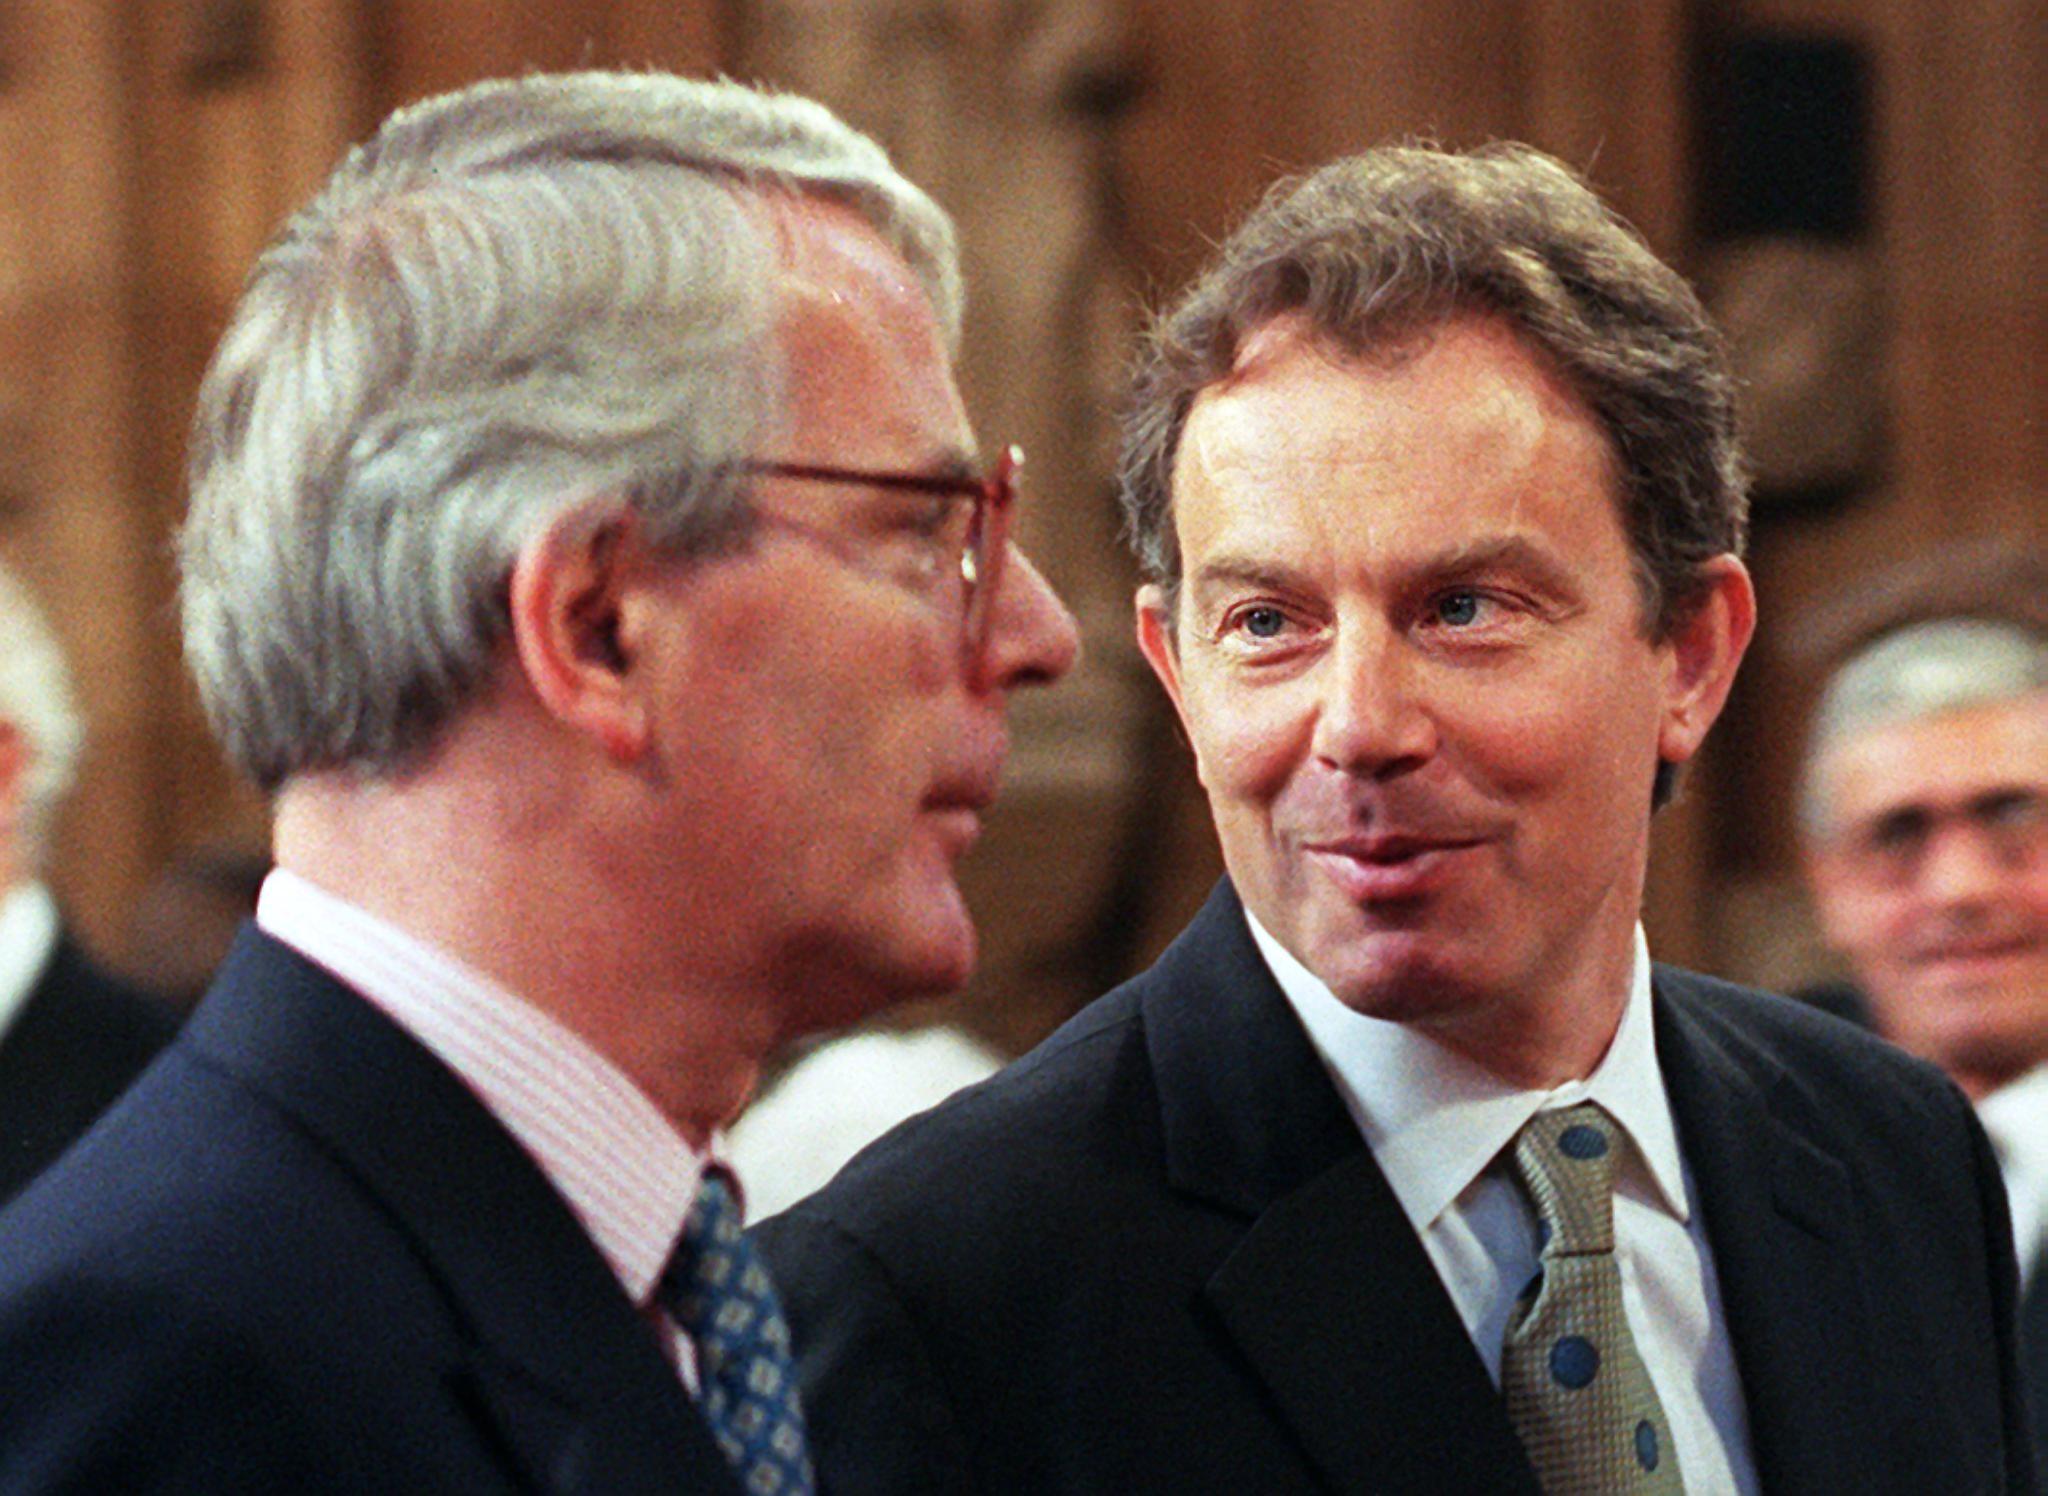 Tony Blair with former prime minister John Major in May 1997